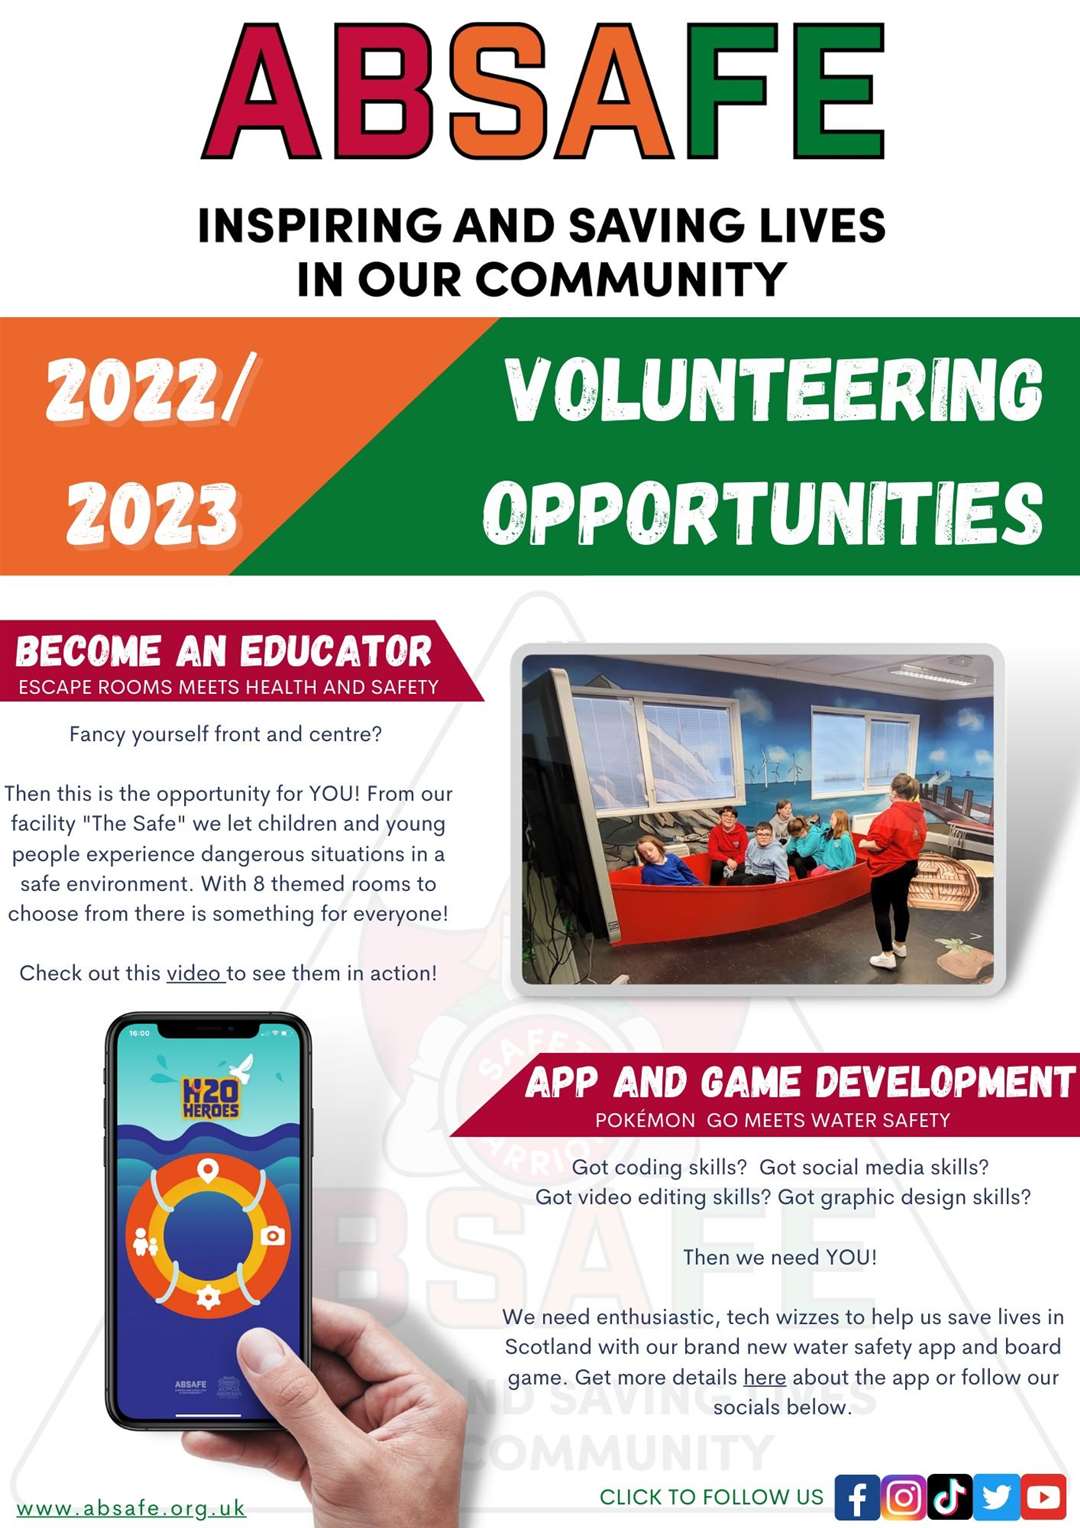 Absafe are looking for education and tech volunteers.